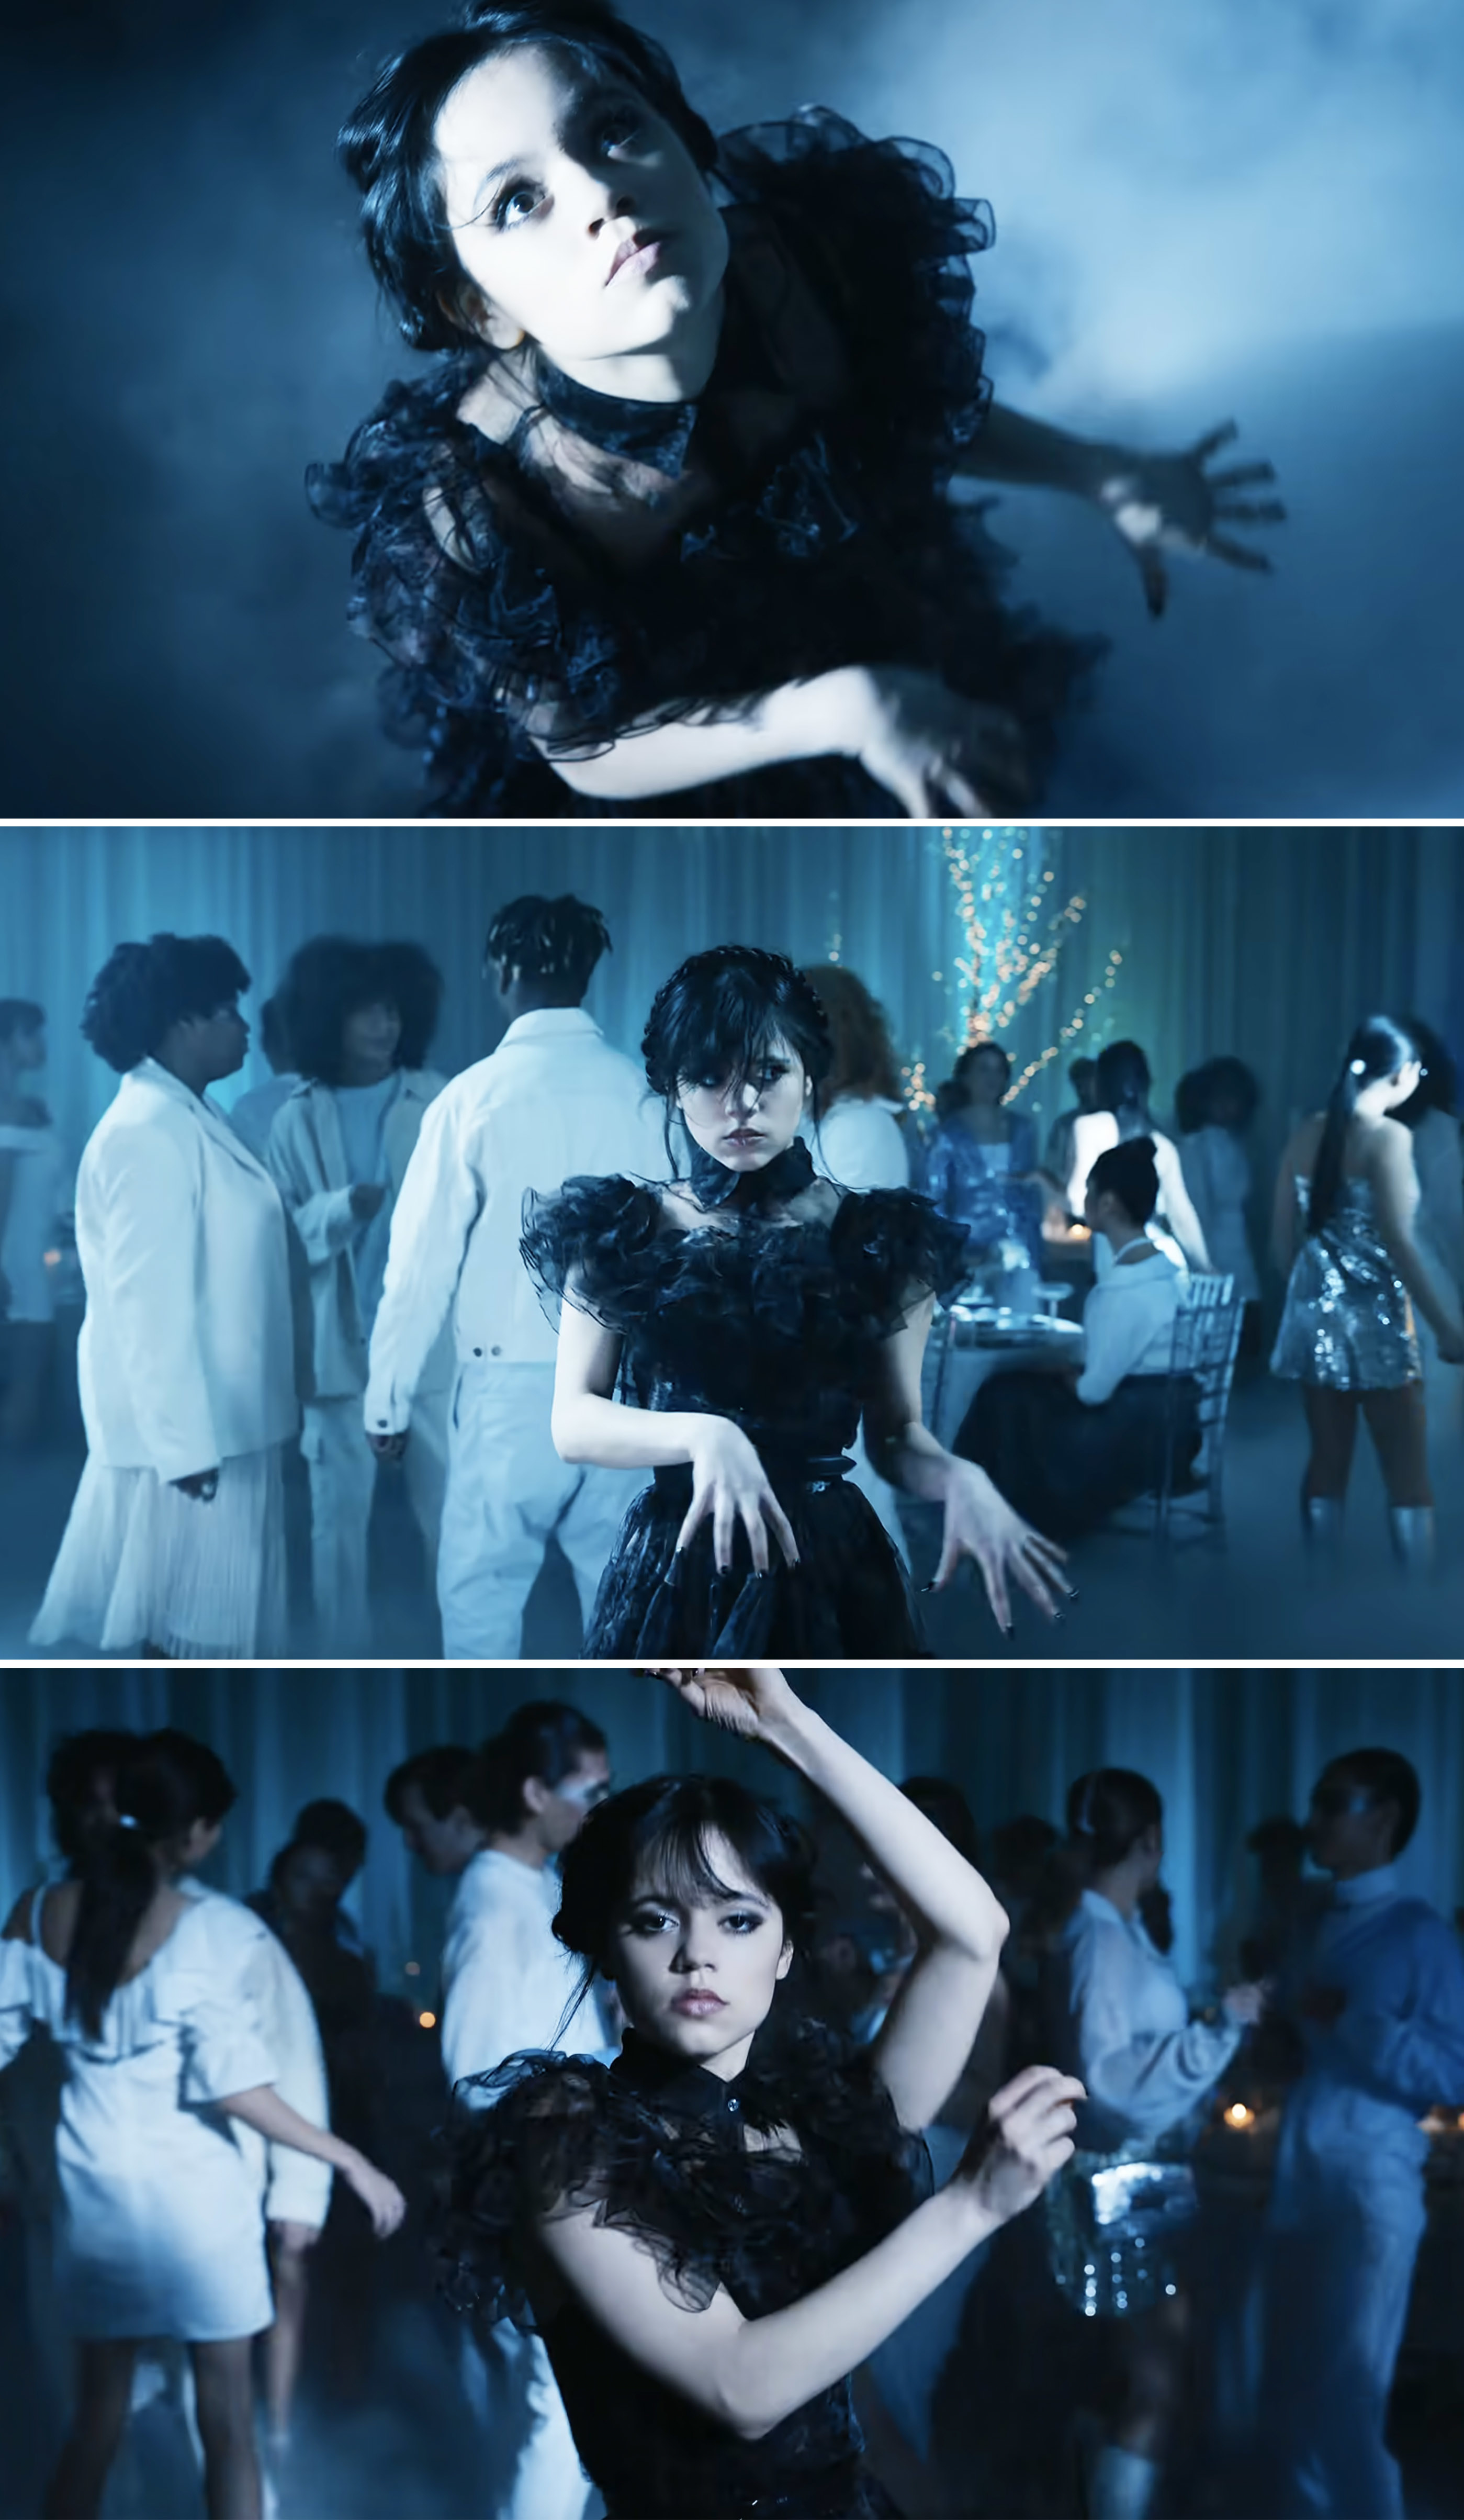 Wednesday in black ruffled outfit dancing amidst a party scene in a smoky blue-lit room